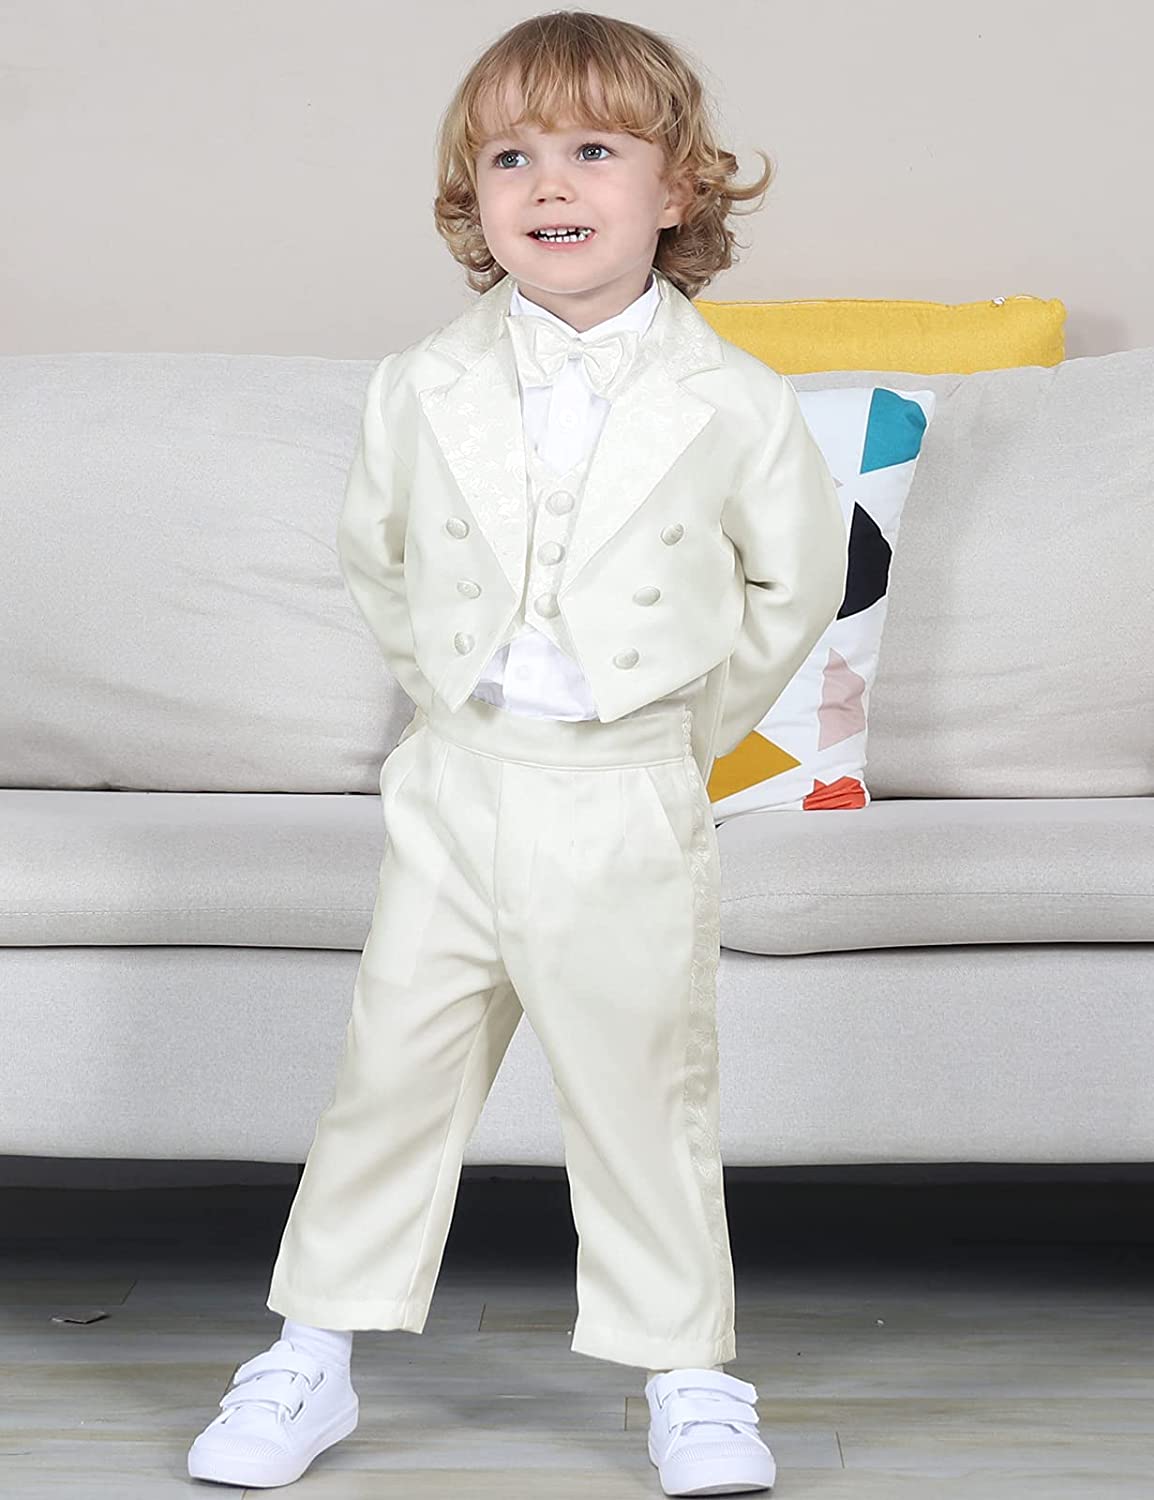 A&J DESIGN Toddler Boys Baptism Outfits Tuxedo Formal Wedding Party Suits Set with Tail